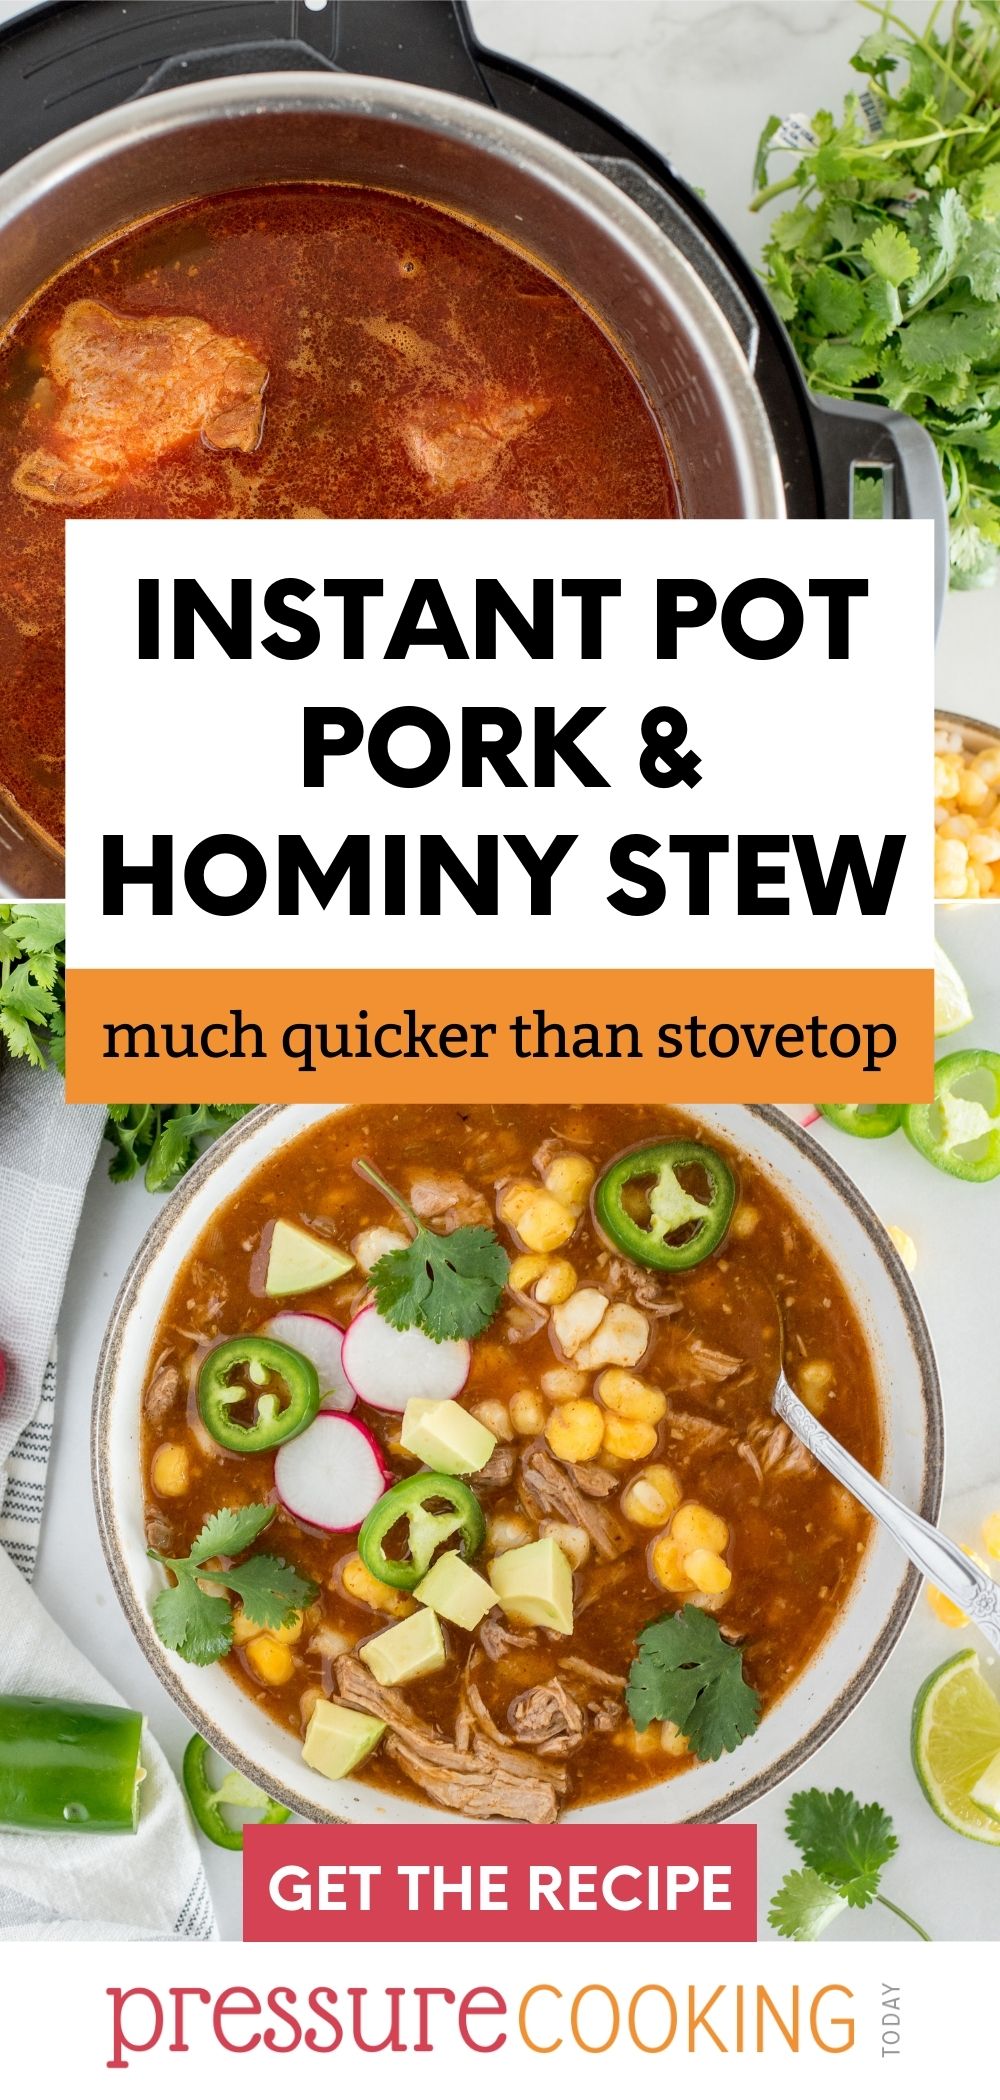 This hearty Instant Pot Stew features tender shredded pork shoulder in a not-too-spicy broth with hominy and topped with your favorite things! You can make this quick posole in any brand of electric pressure cooker. via @PressureCook2da